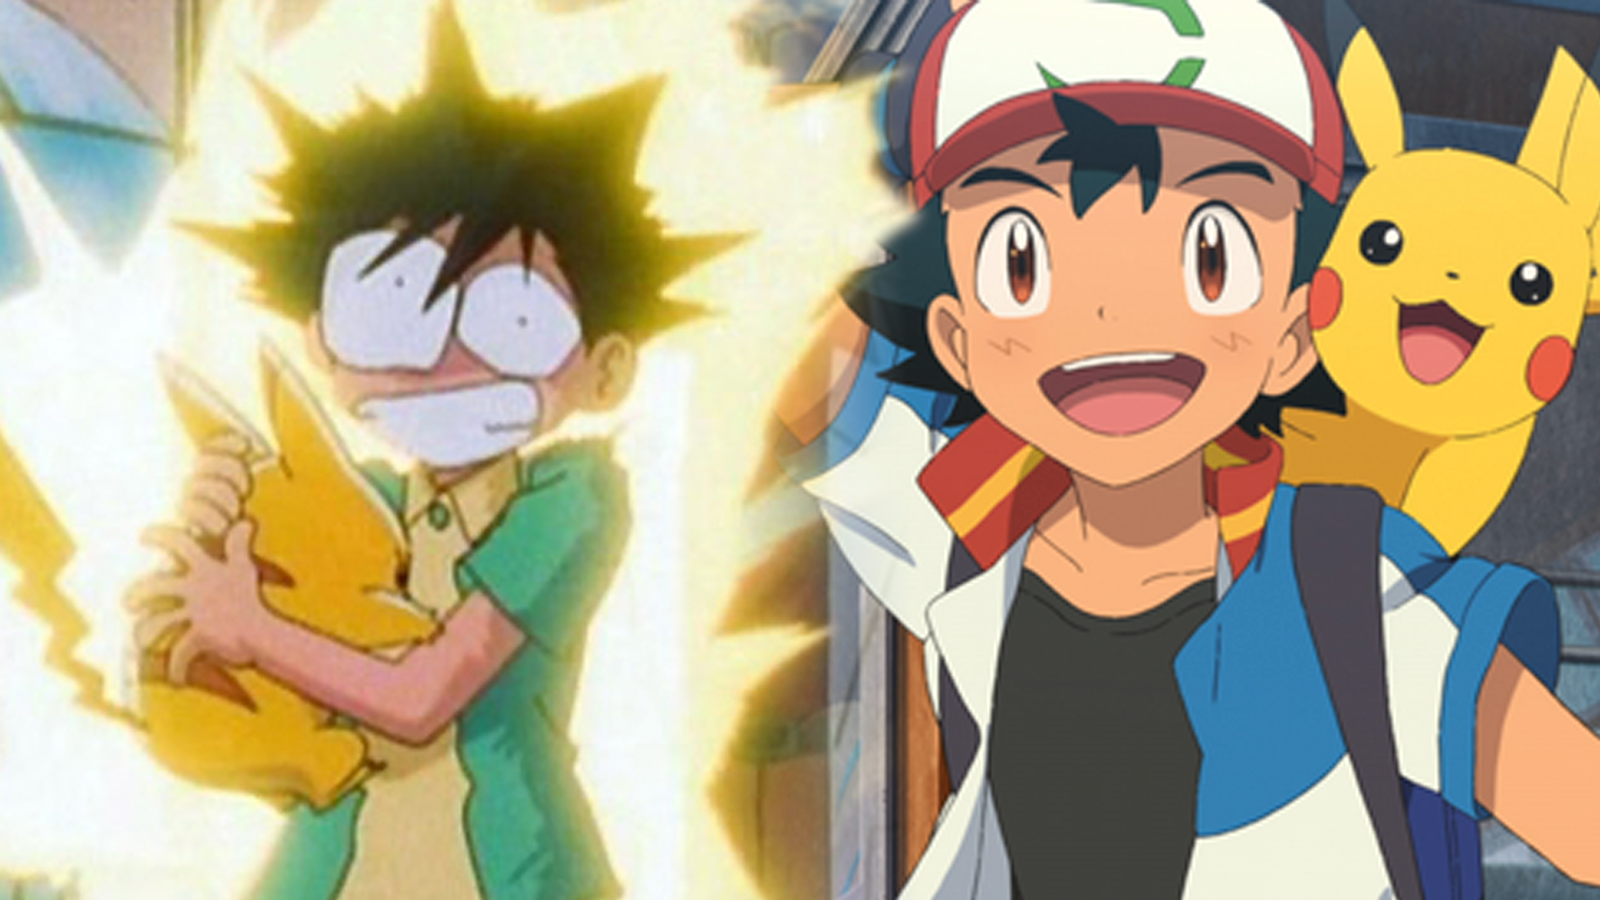 New Pokémon Series Coming in 2023 Without Ash Ketchum  Anime Pokemon  Television  Just Jared Jr